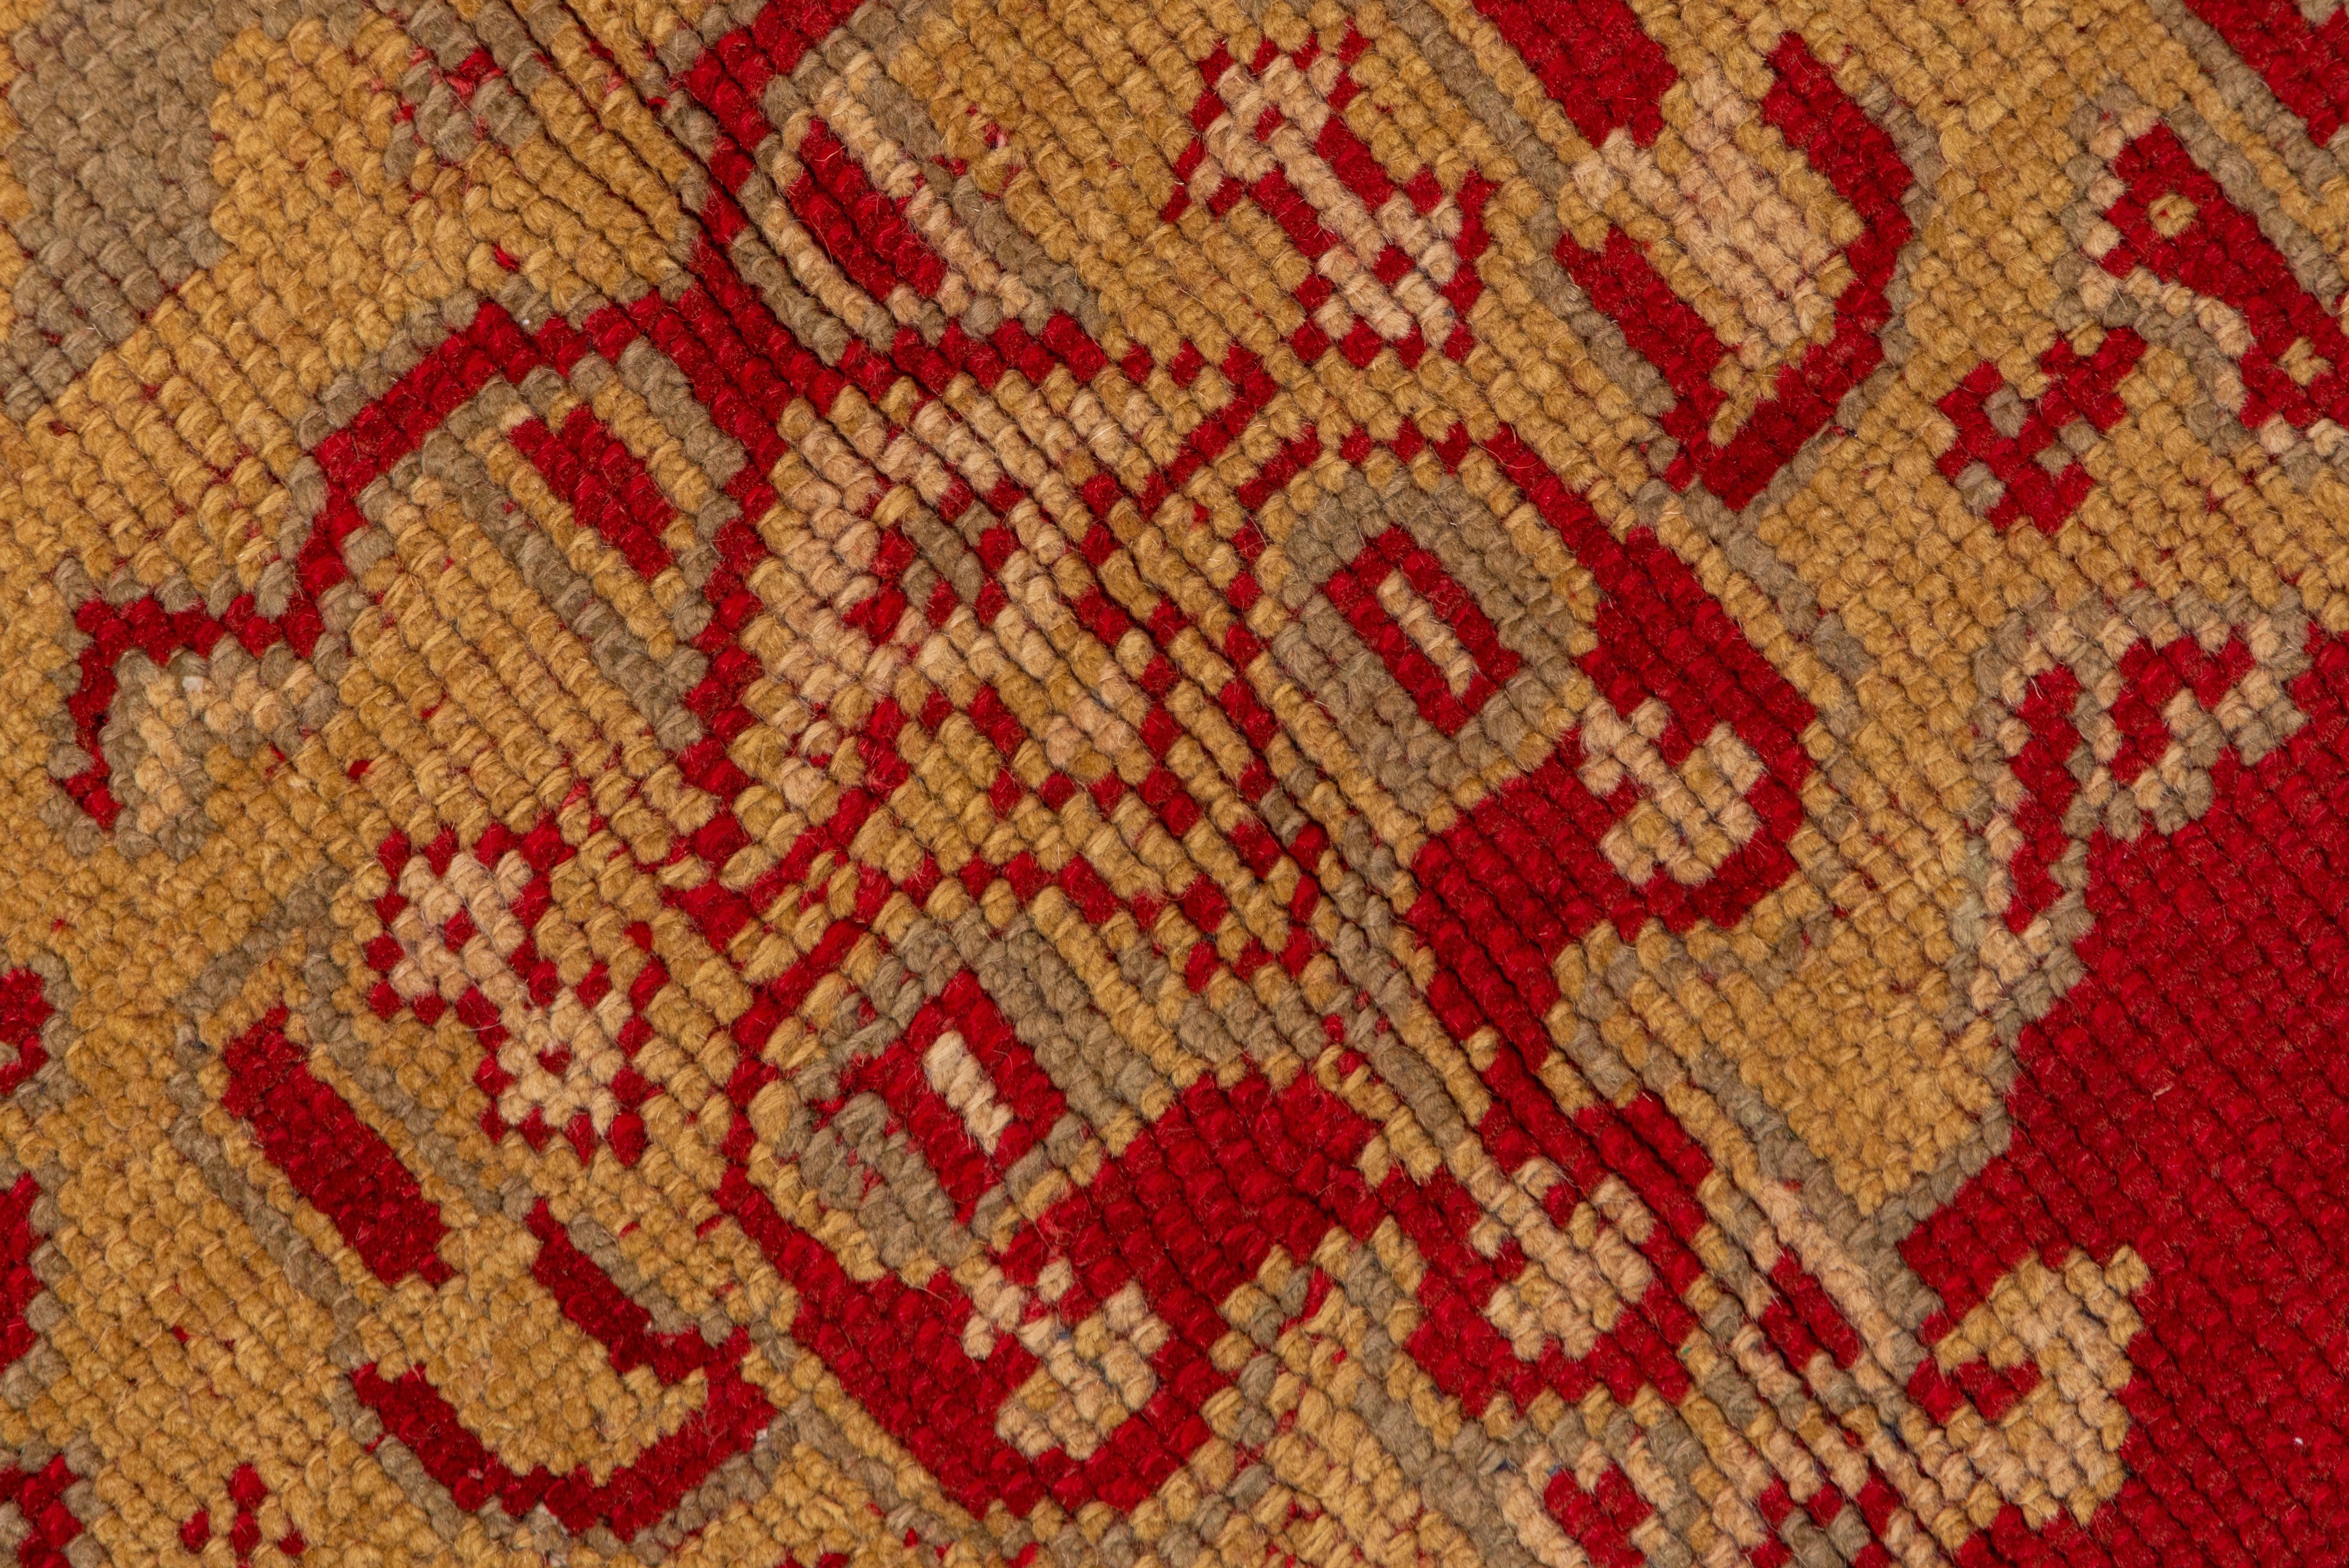 The Turkey red field displays a single central ragged palmette column flanked by half- columns of Yaprak (Leaf) design. The tonally in suite border shows rosettes and hyacinth sprays, with light green and straw details overall.